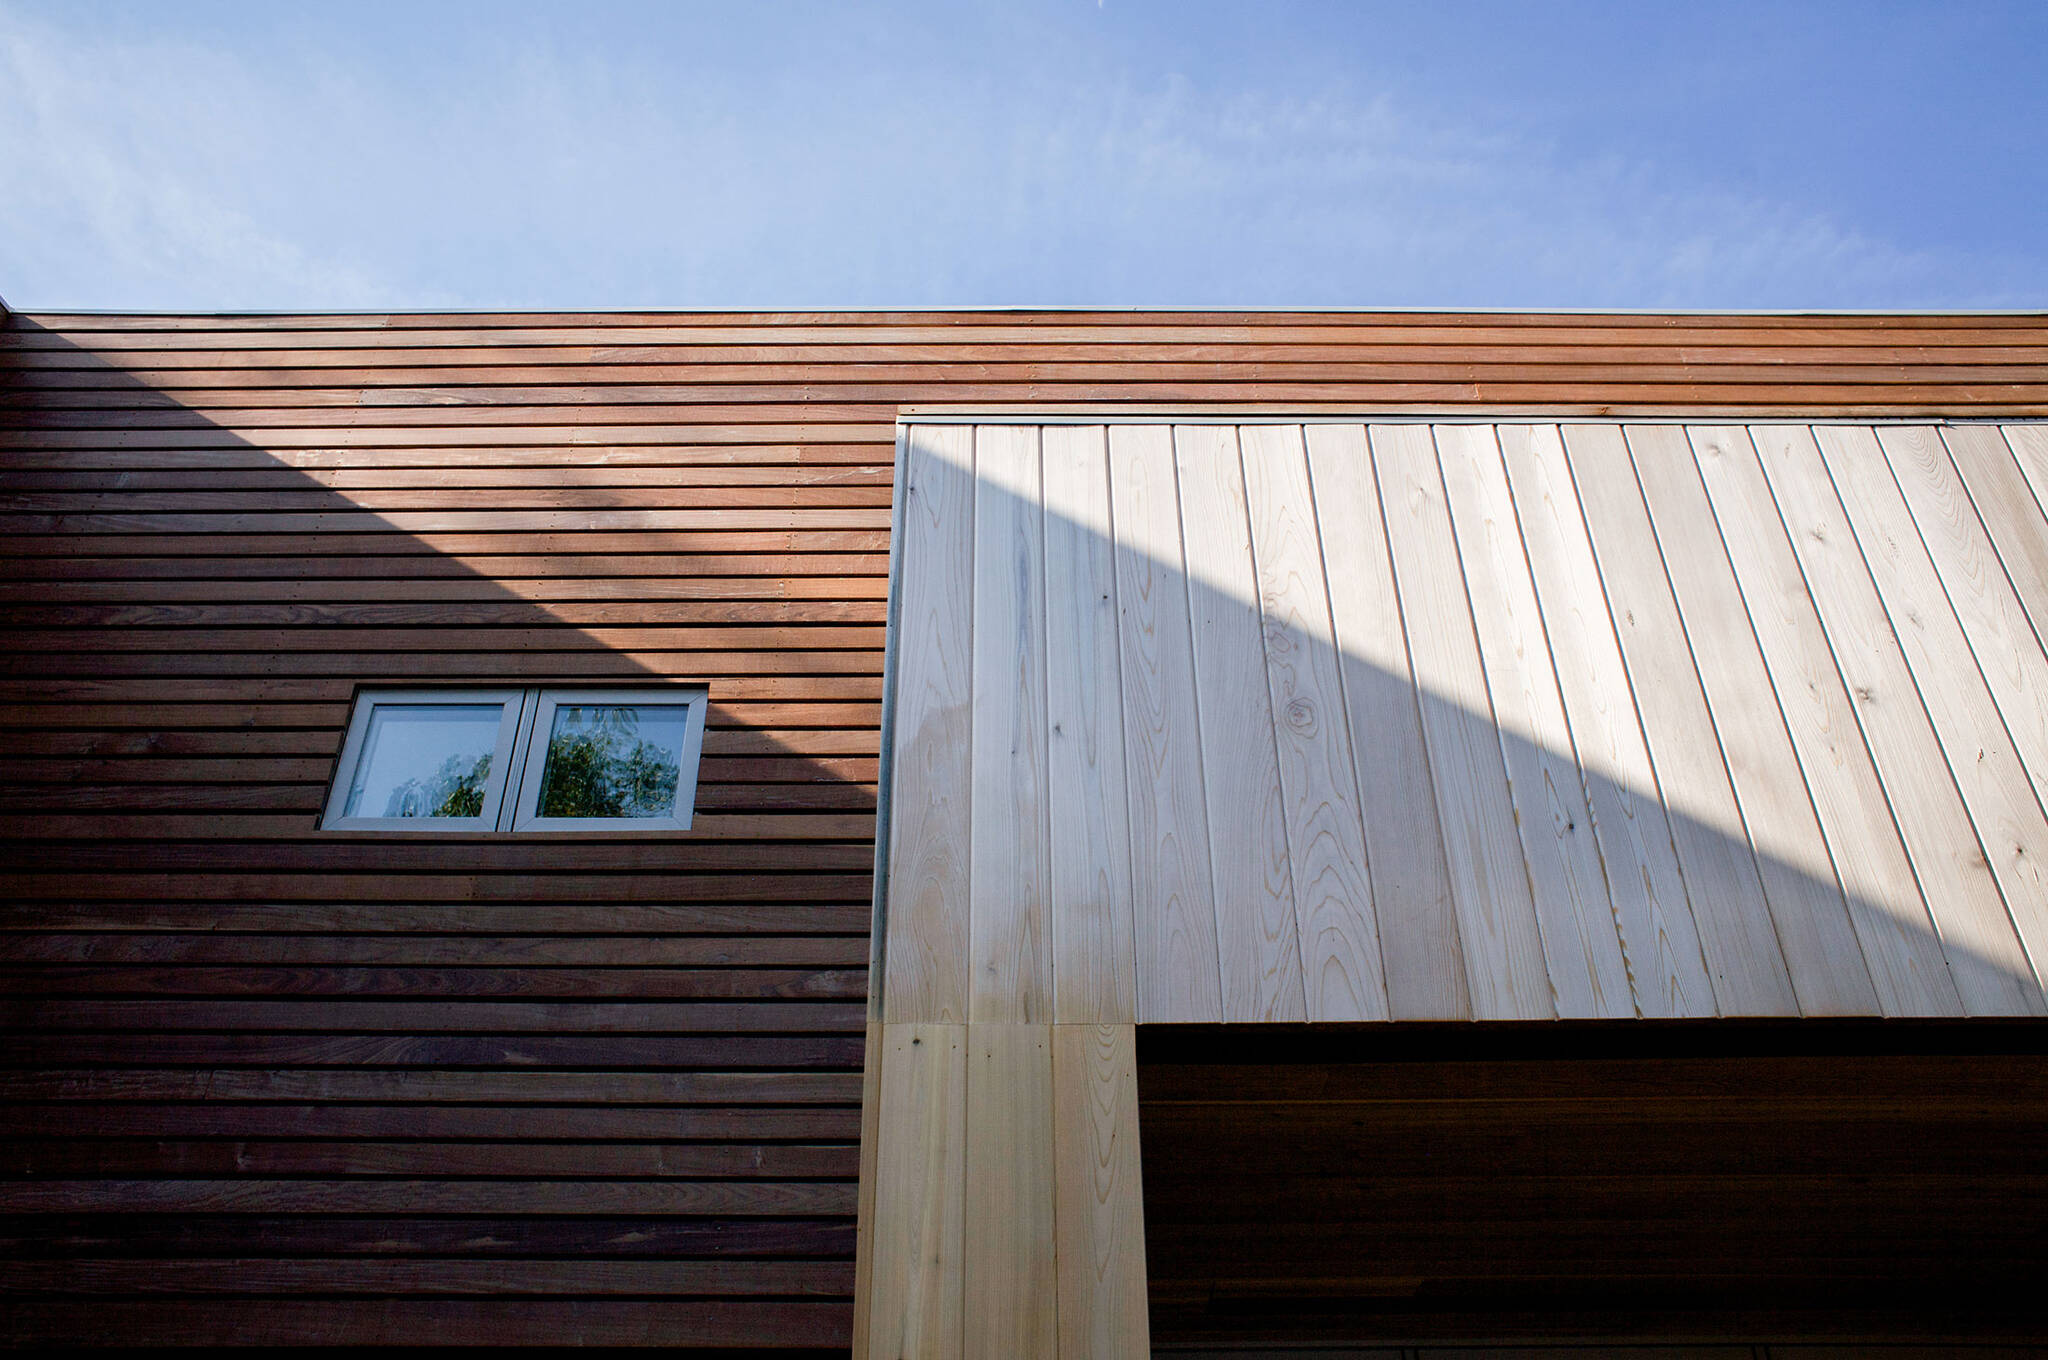 Vertical cedar siding and Horizontal IPE Brazilian walnut rainscreen cladding of the sustainable lake house project in Omena, Michigan designed by the architecture studio Danny Forster & Architecture